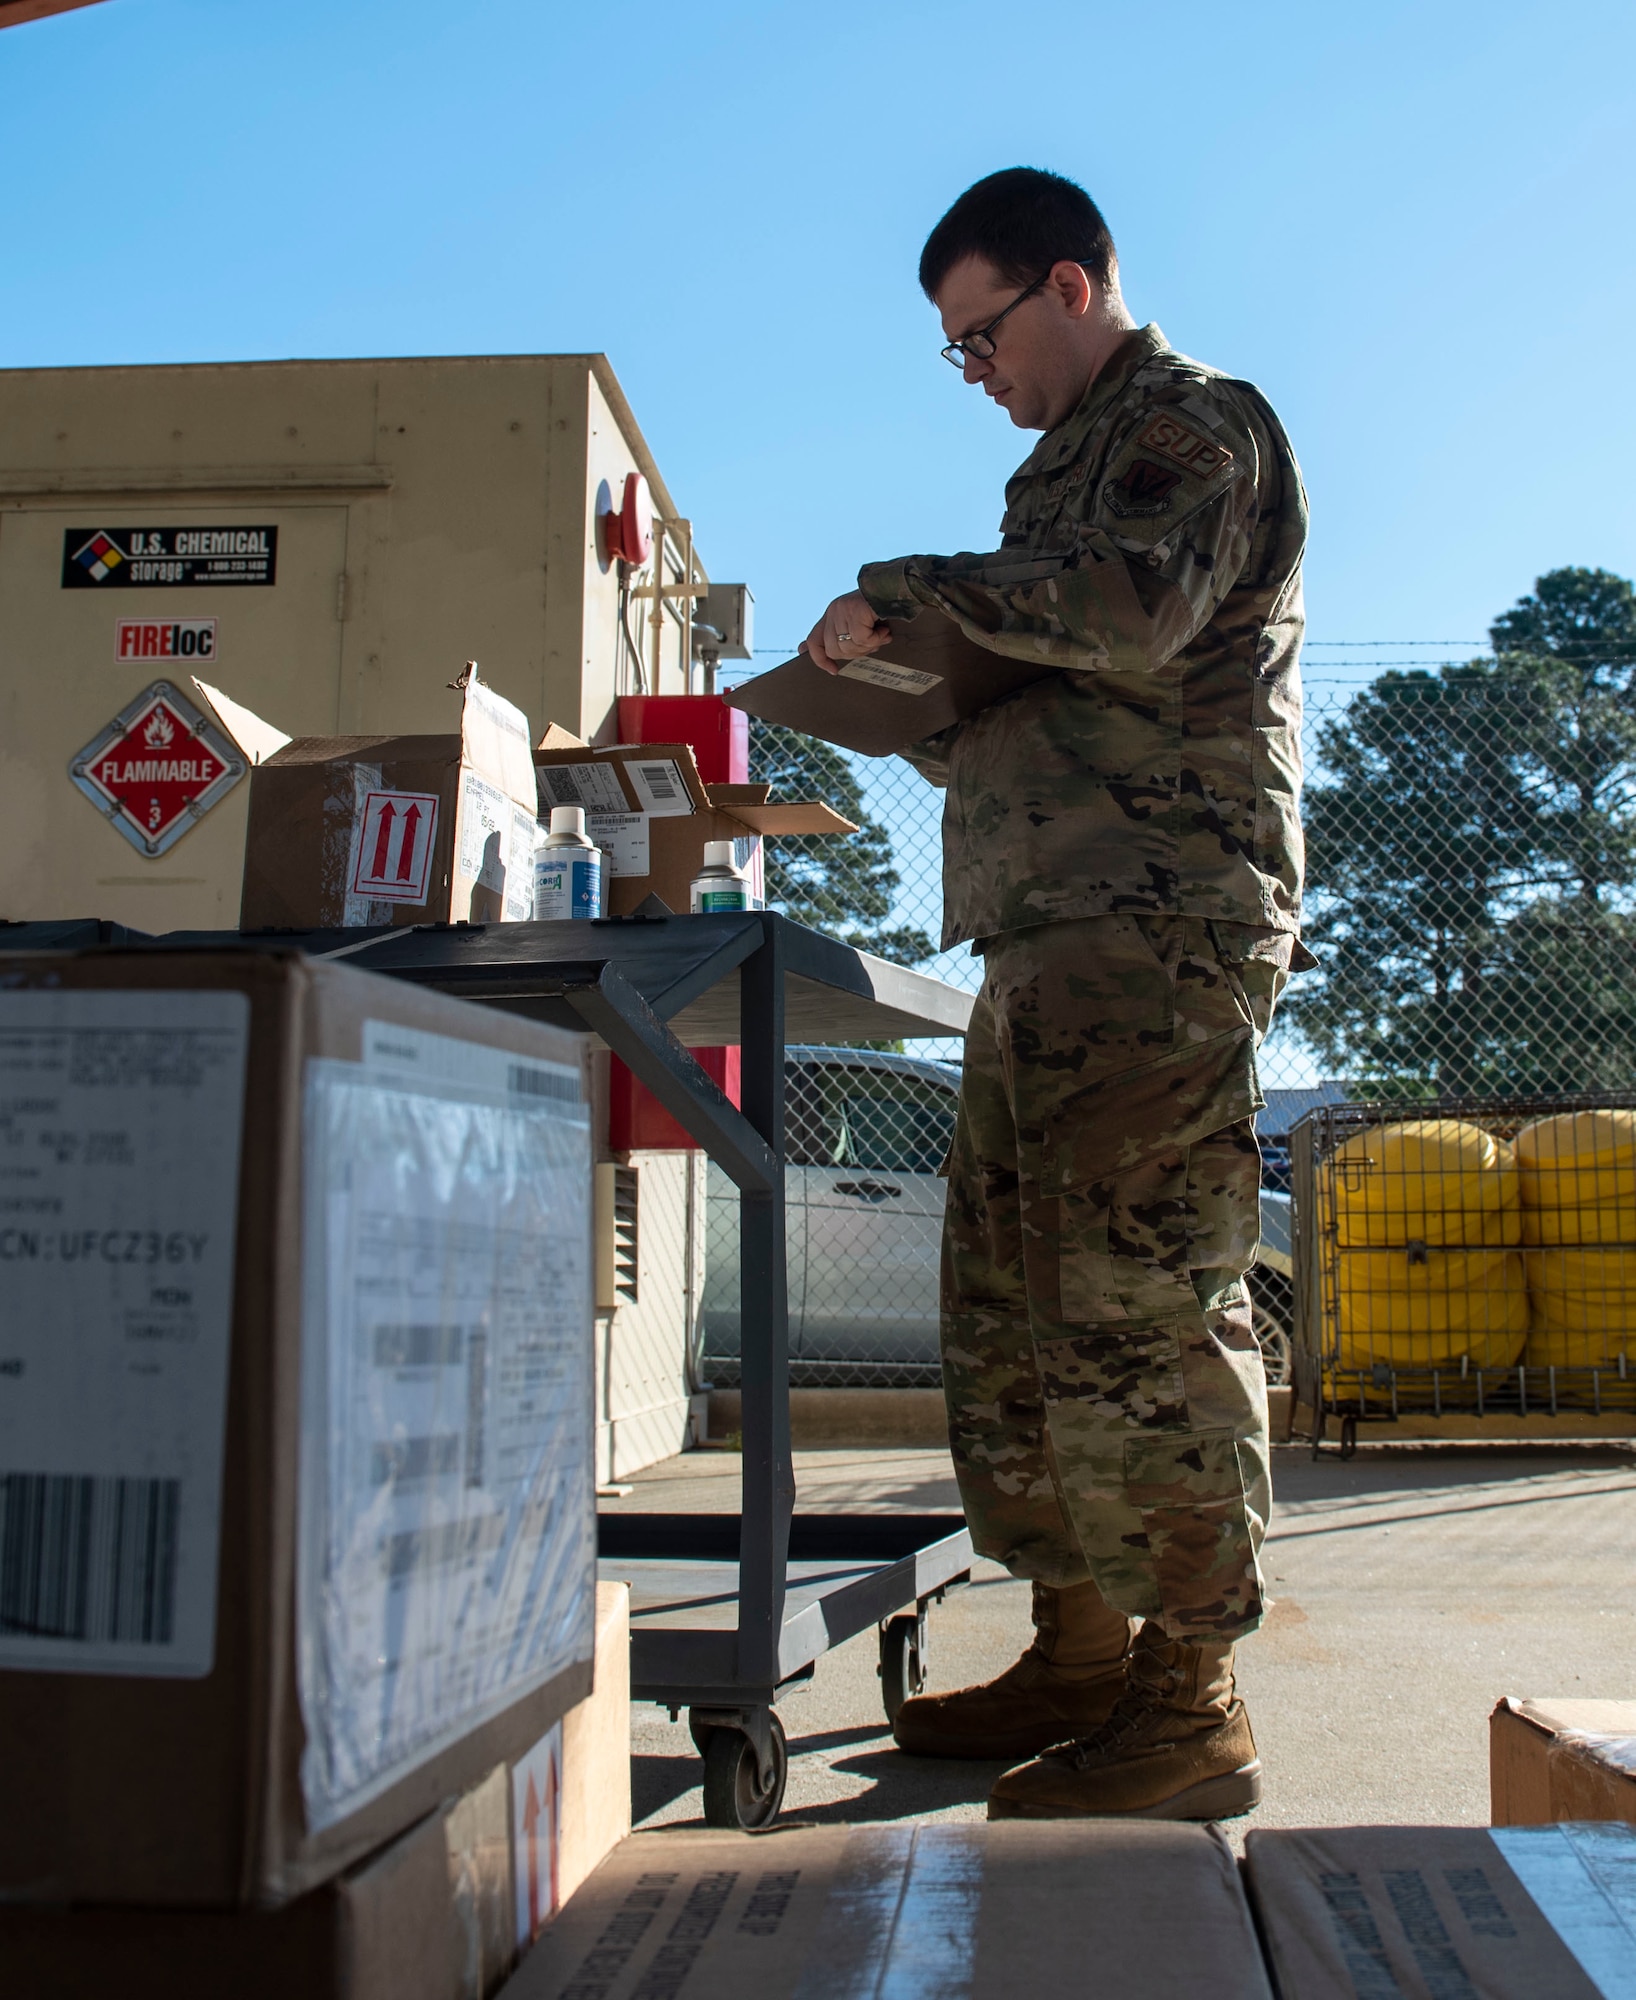 Senior Airman Dylan Buchheit, 4th Logistics Readiness Squadron material management journeyman, unpacks materials at Seymour Johnson Air Force Base, North Carolina, May 17, 2022. Airmen assigned to the hazardous material shop ensure that hazardous materials are properly packaged, marked, labeled and safely stored. (U.S. Air Force photo by Airman 1st Class Sabrina Fuller)